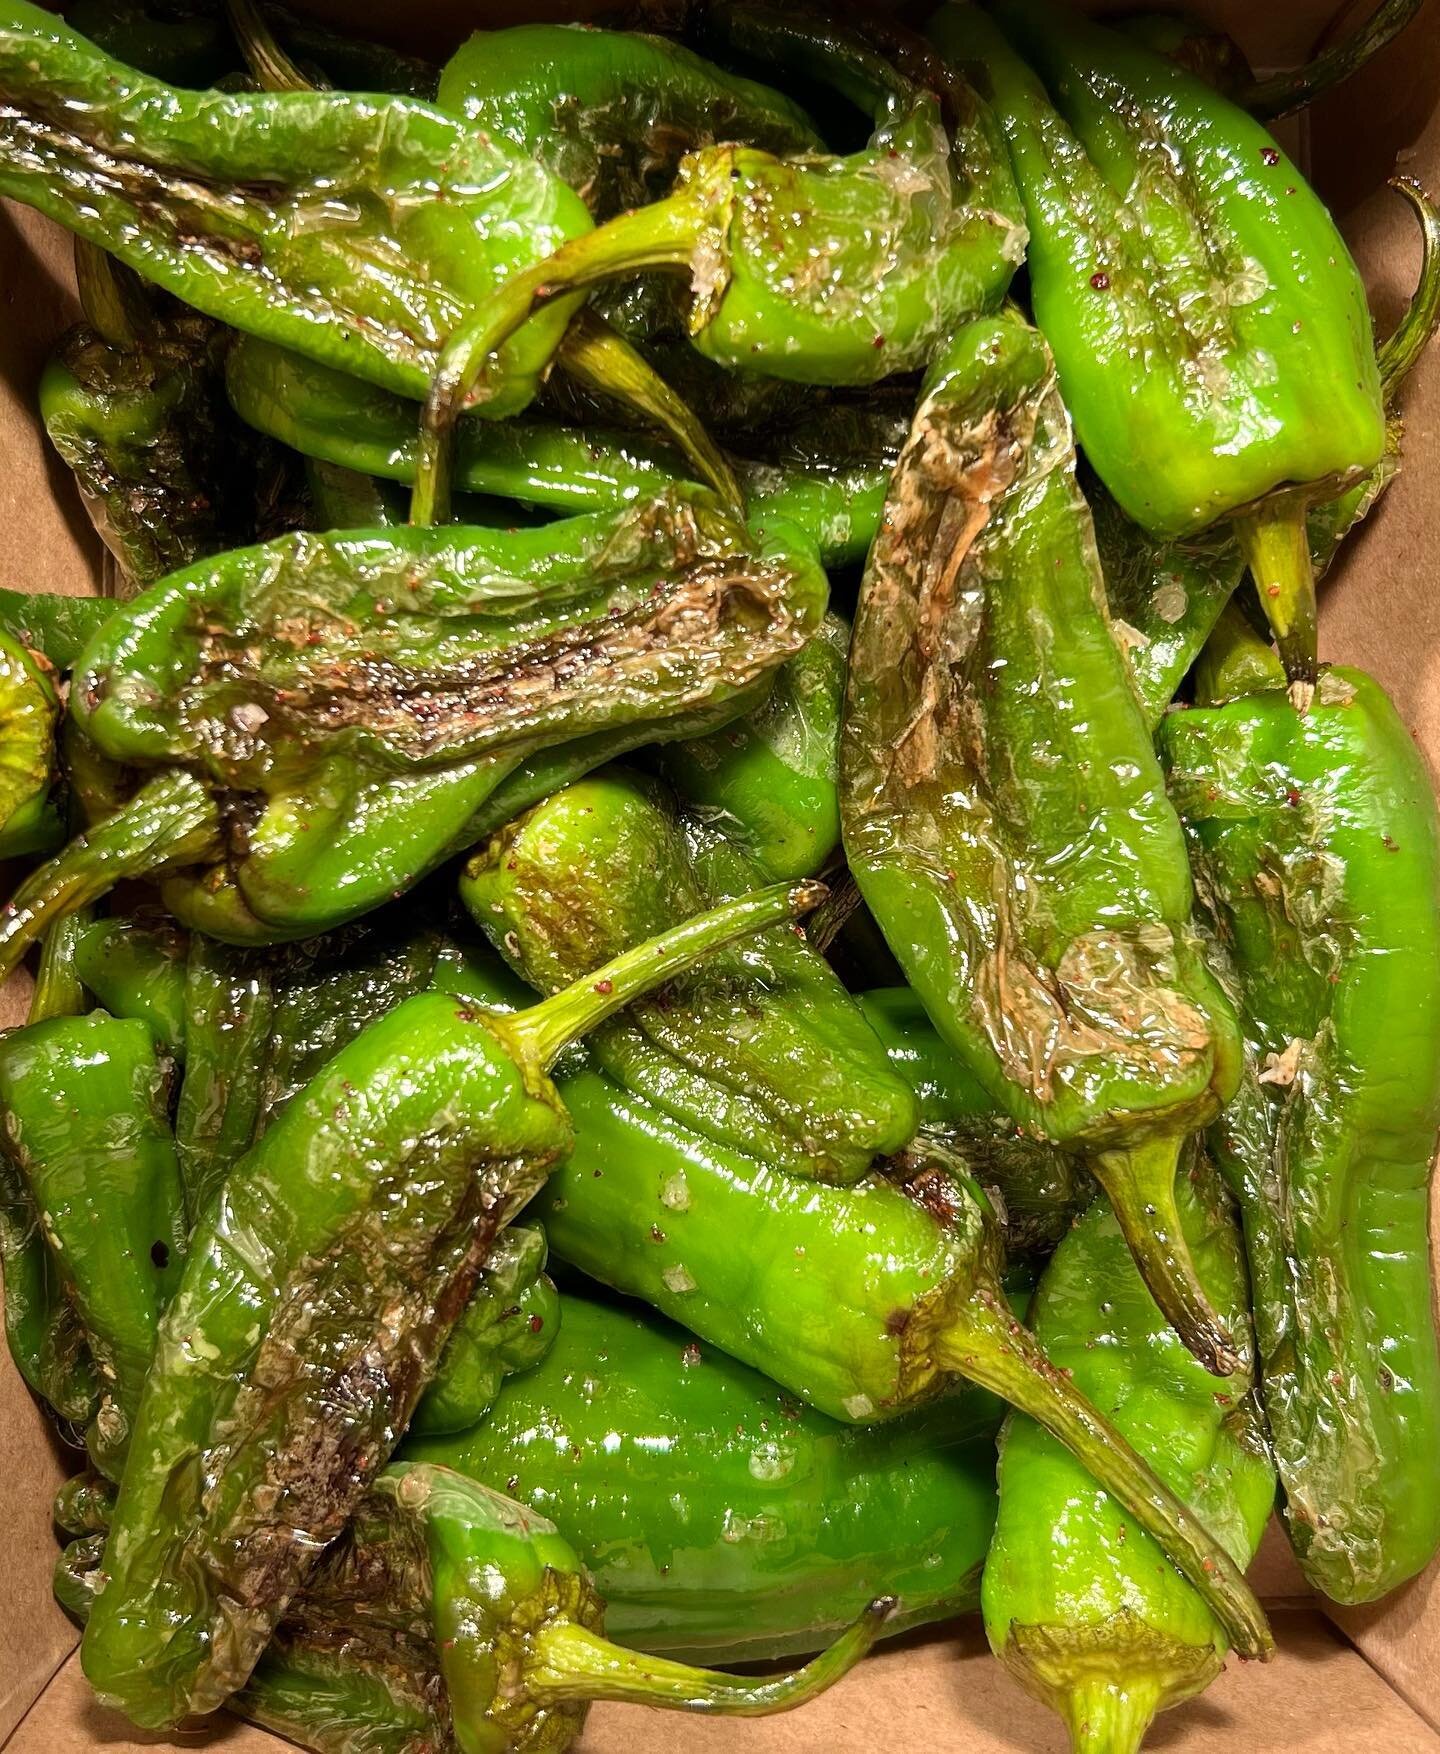 Padron Peppers with Sumac Salt

Find this on our Friday evening small plates menu